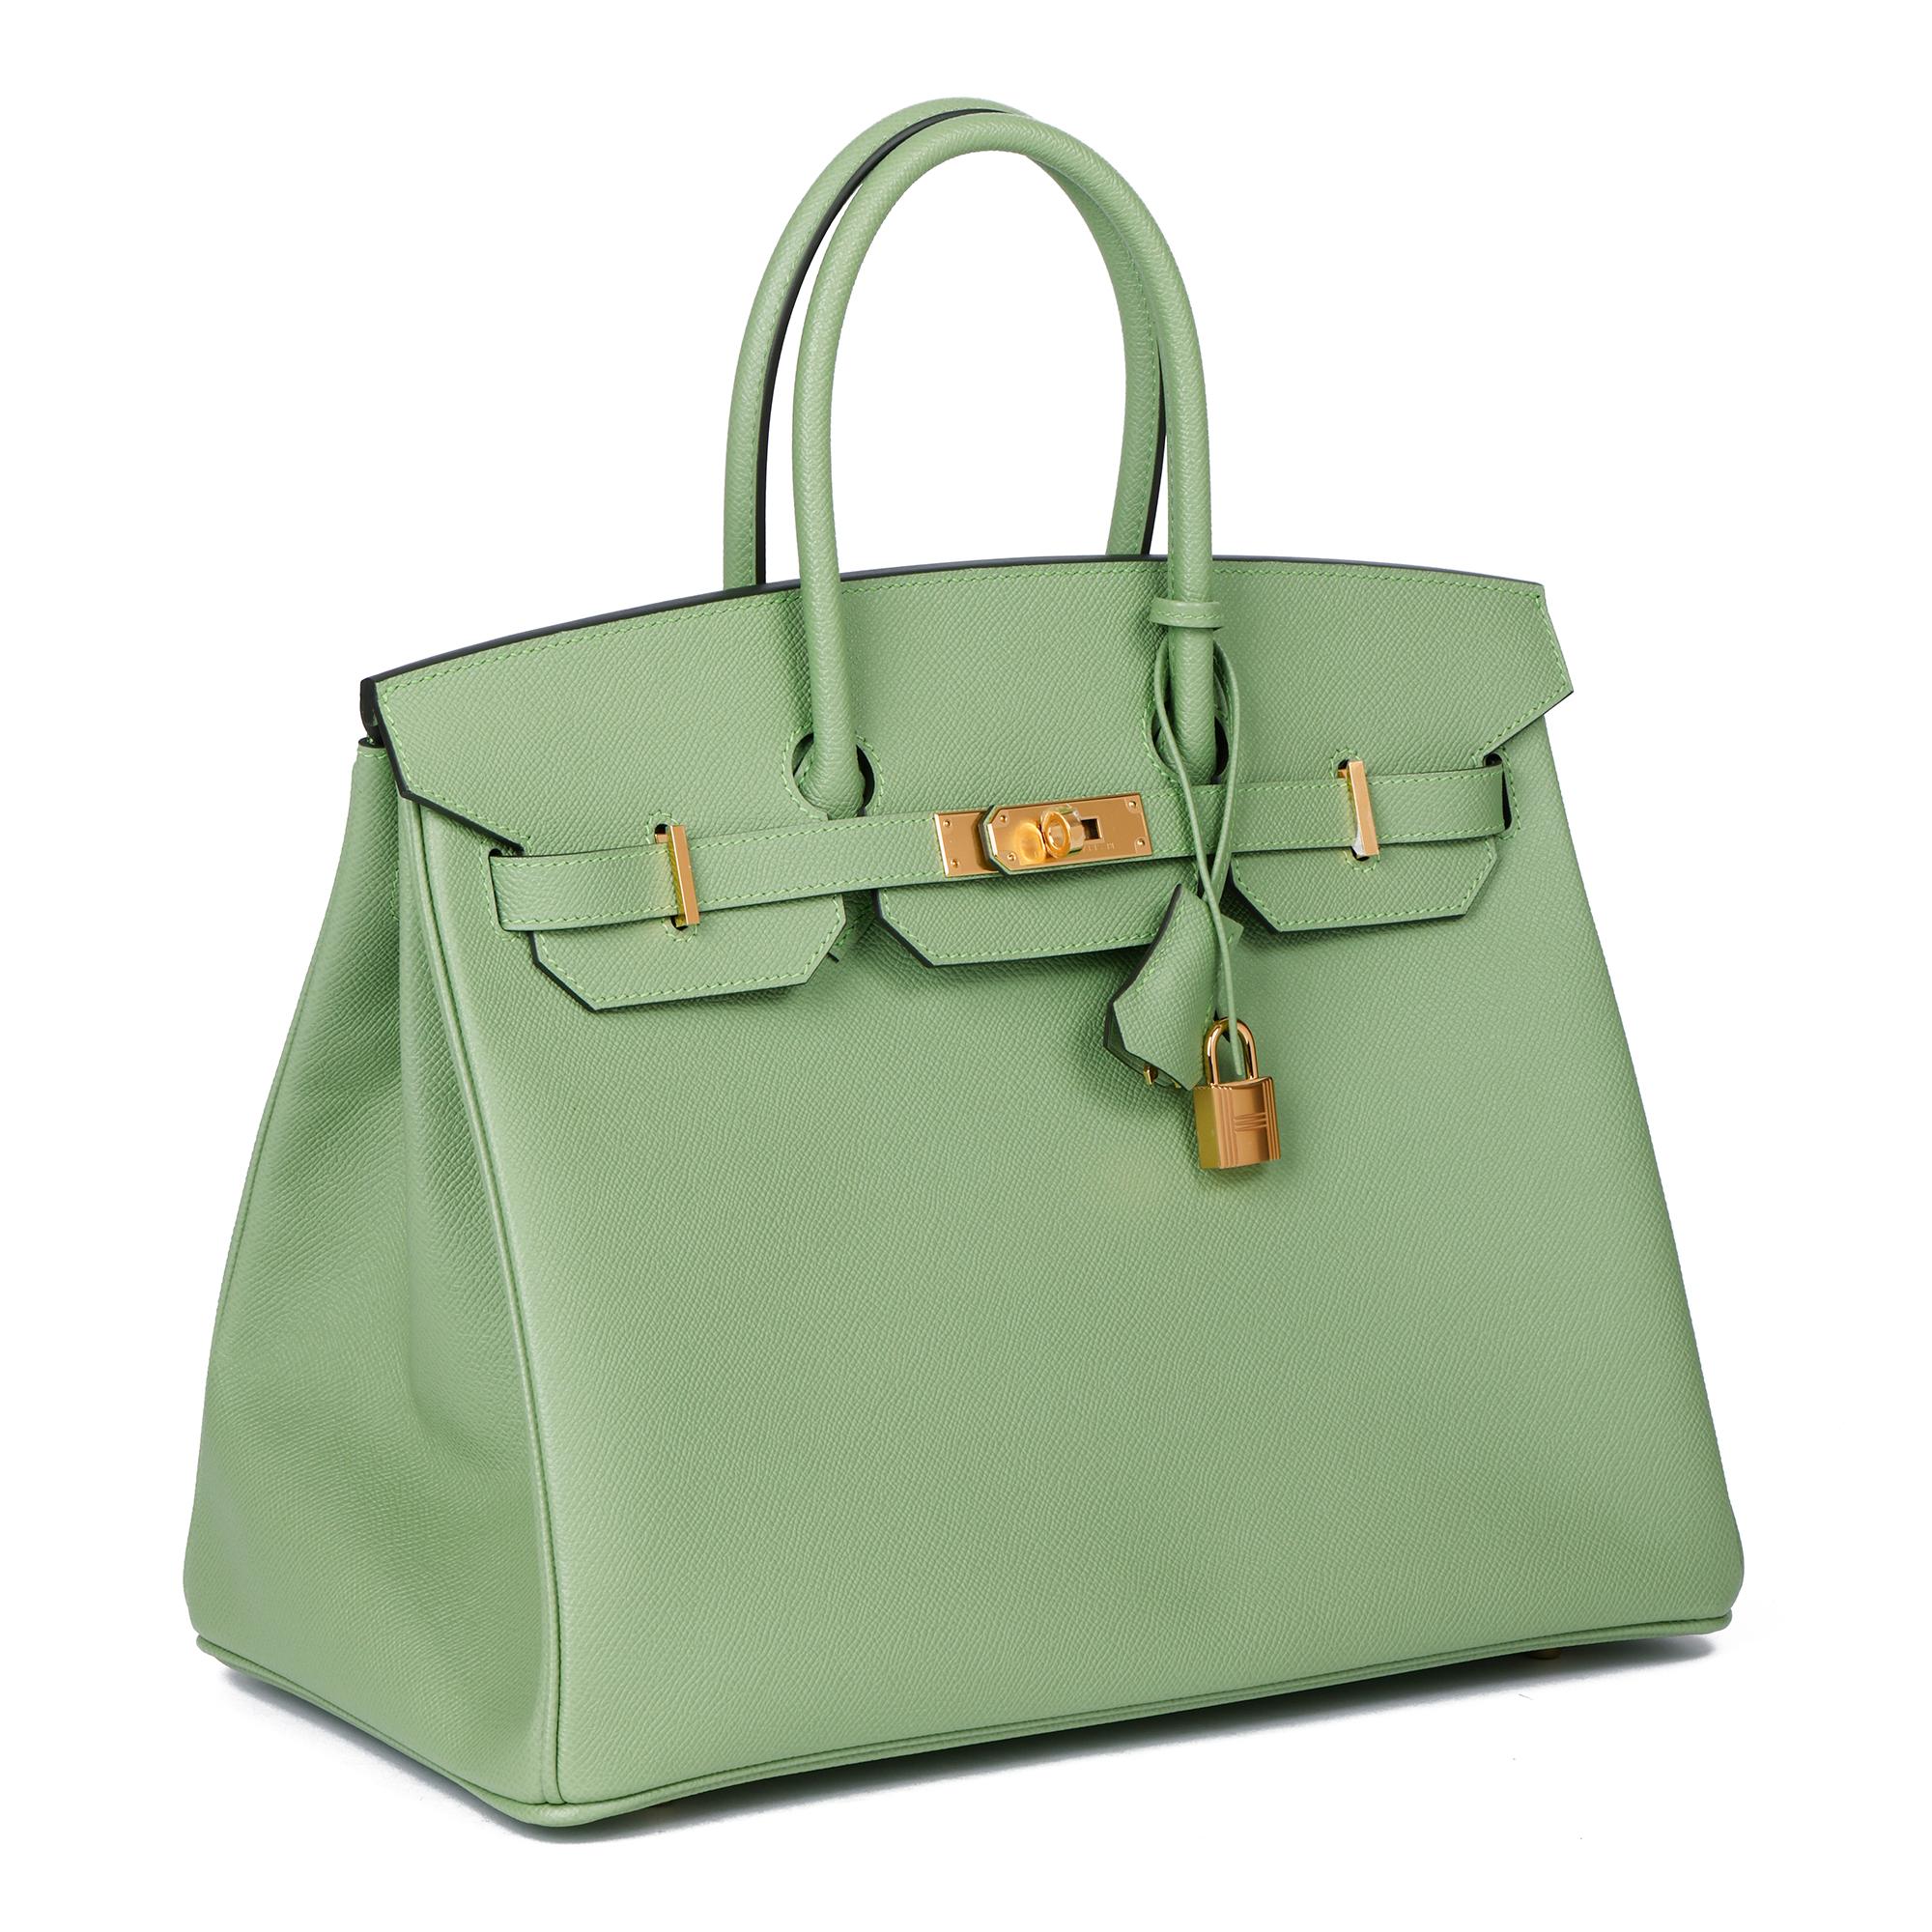 HERMÈS
Vert Criquet Epsom Leather Birkin 35cm 

Xupes Reference: HB3989
Serial Number: Y
Age (Circa): 2021
Accompanied By: Hermès Dust Bag, Box, Care Booklet, Protective Felt, Padlock, Keys, Clochette, Rain Cover
Authenticity Details: Date Stamp